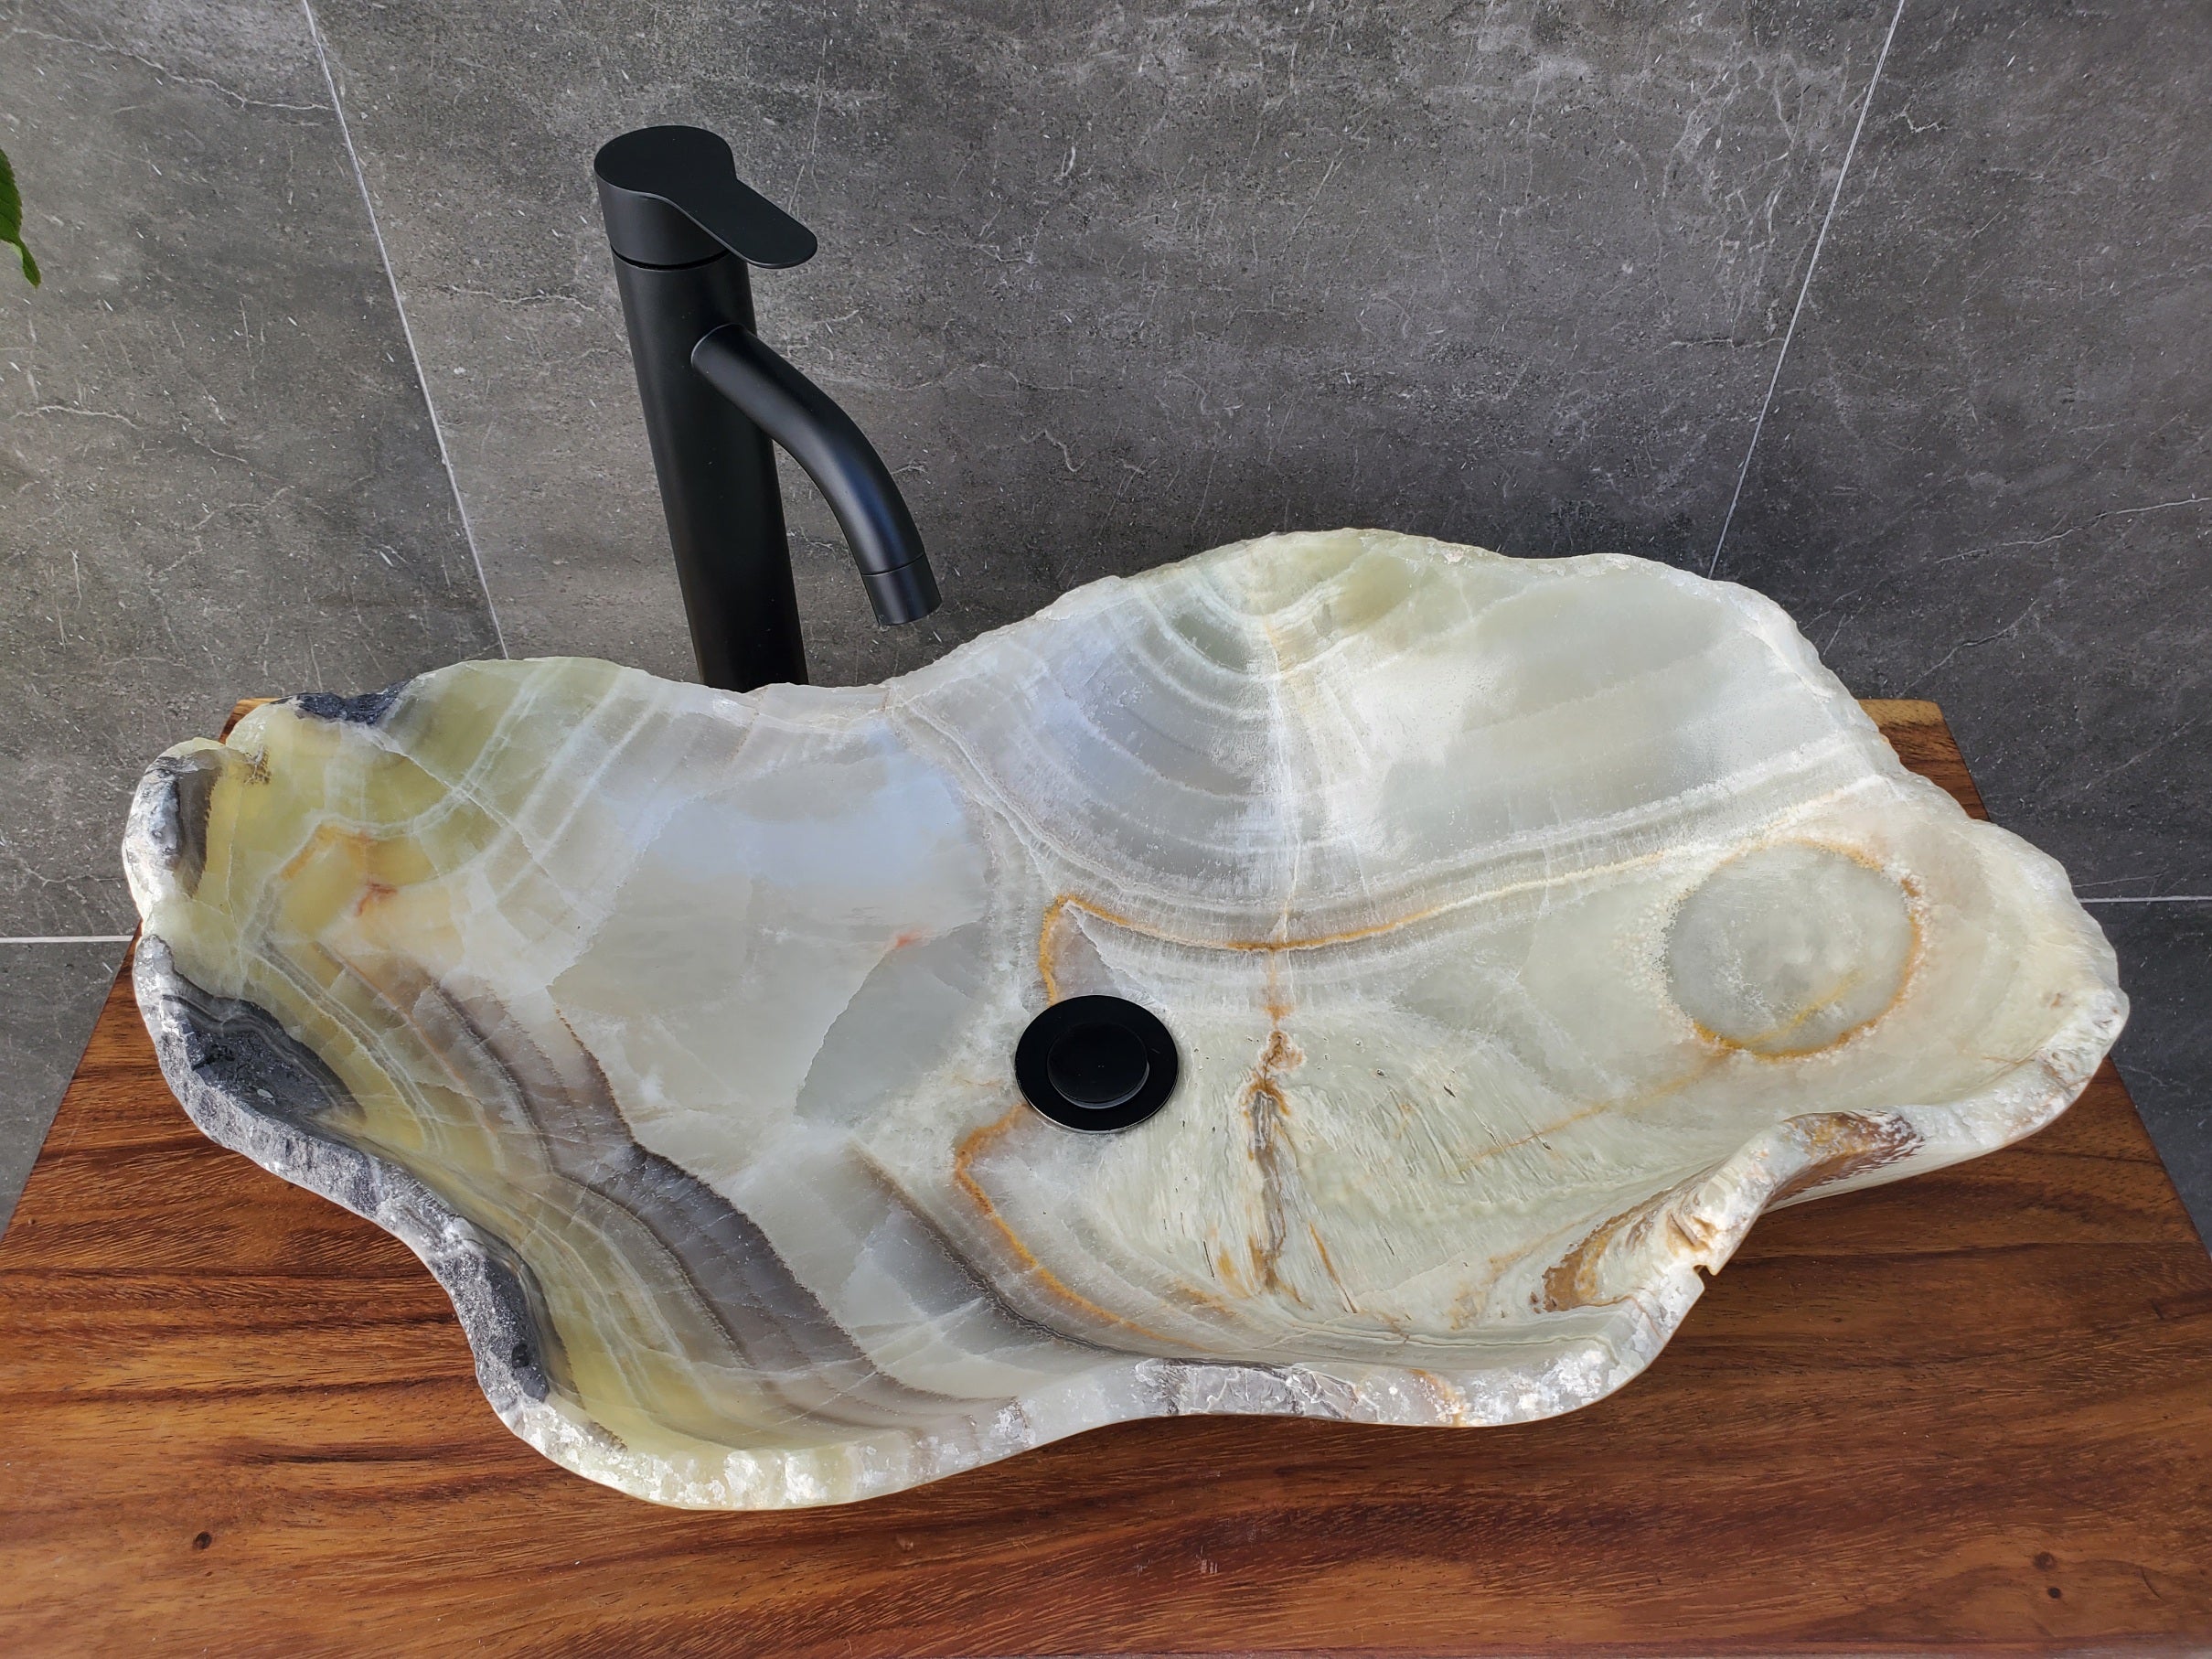 Green Onyx Stone Bathroom Vessel Sink. Epoxy Sealant is available with fast shipping. Standard drain size. A beautiful work of art. Handmade. Buy Now at www.felipeandgrace.com.